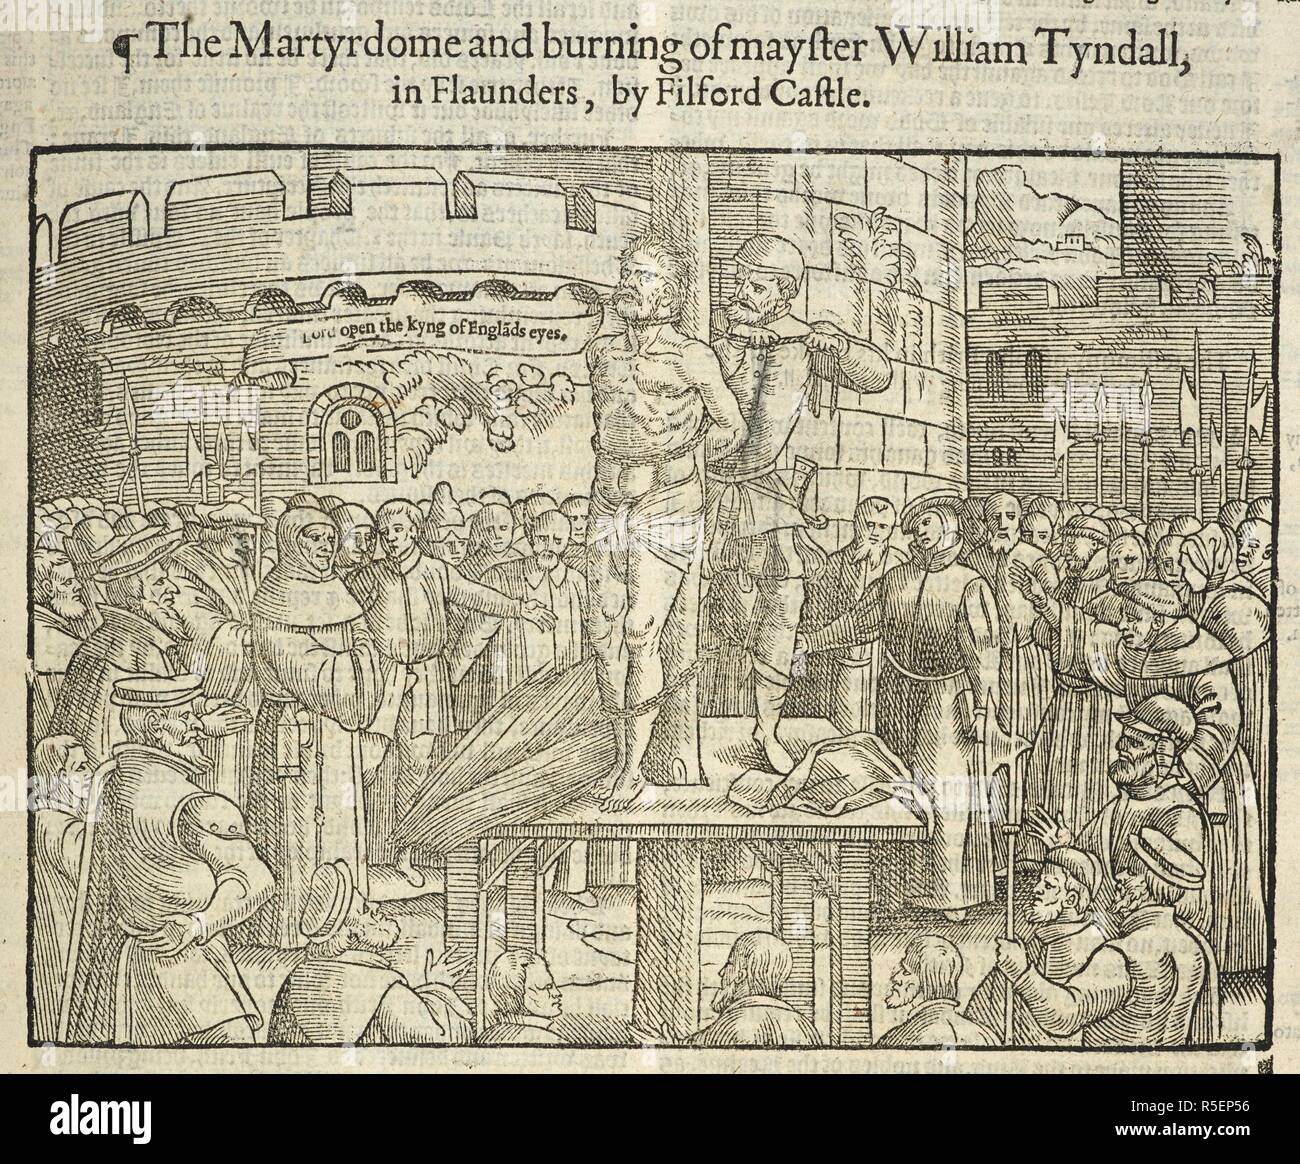 The martydome and burning of martyr William Tyndale ...'. In 1535, Tyndale was arrested and jailed in the castle of Vilvoorde (Filford). In 1536 he was convicted of heresy and executed by strangulation, after which his body was burnt at the stake. Actes and monuments of these latter and perillous dayes ... [ Foxe's Book of Martyrs]. London, 1583. Source: 4824.k.3 page 1079. Author: FOXE, JOHN. Stock Photo